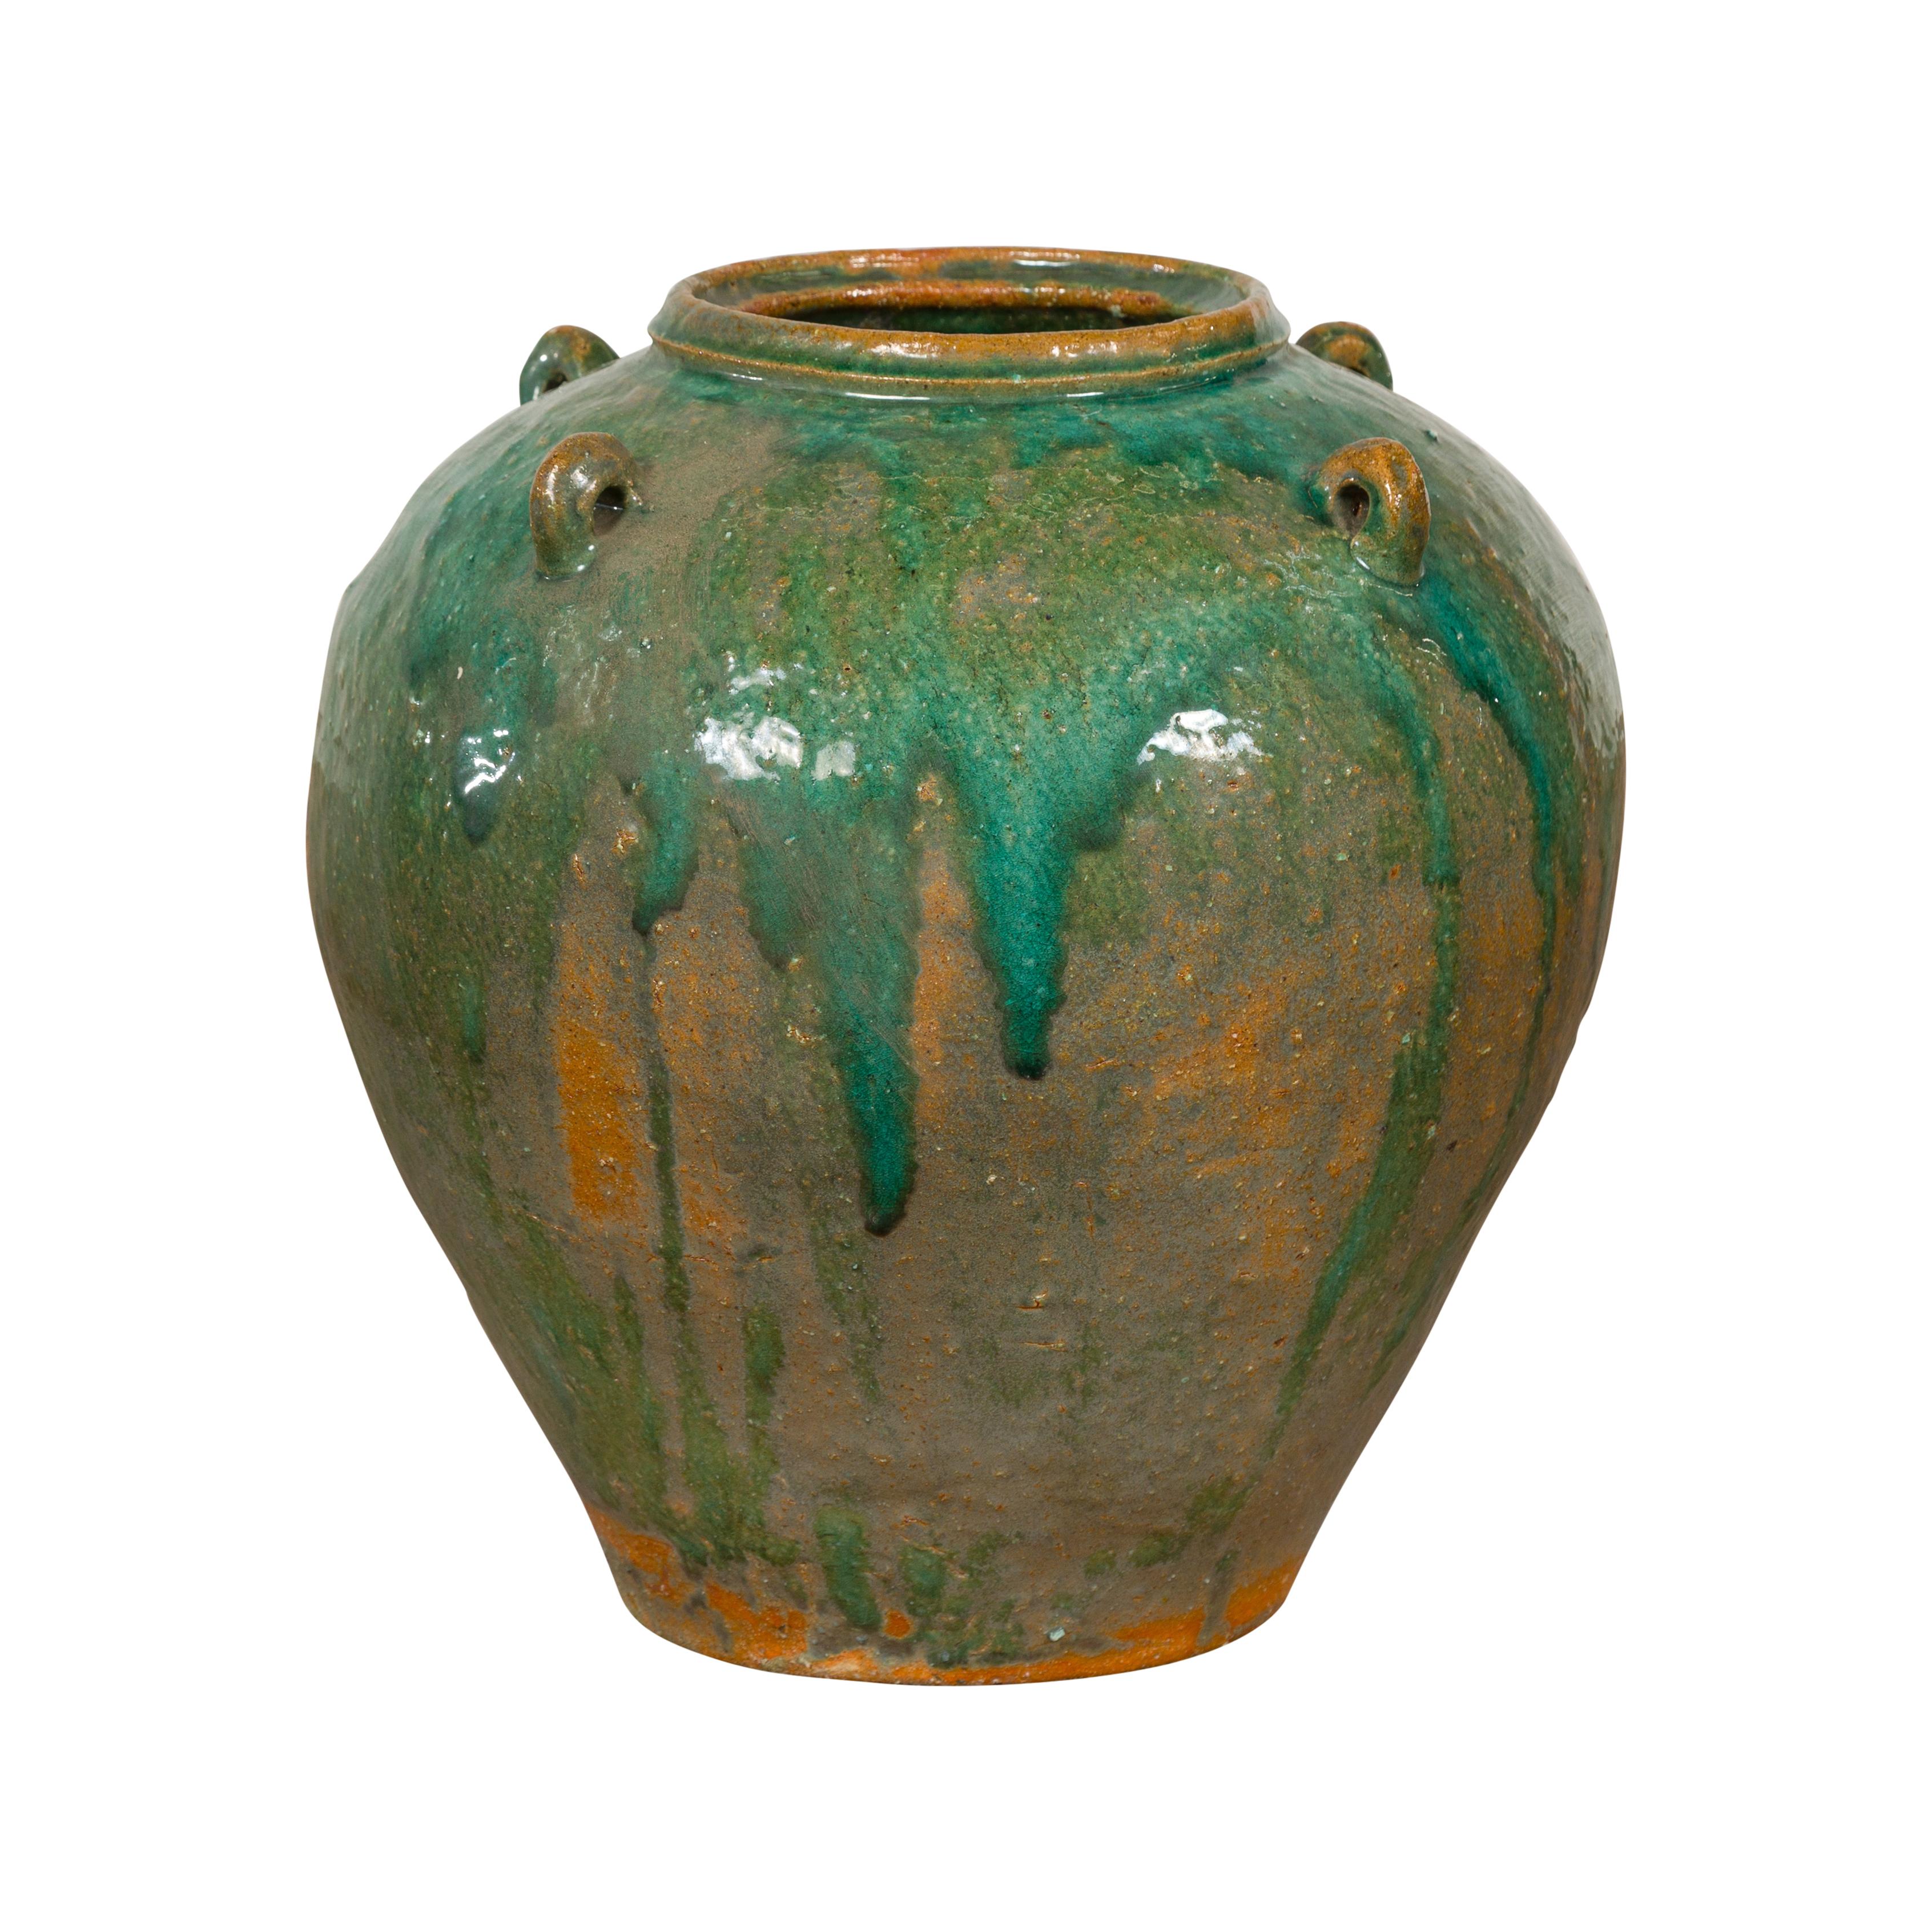 A Chinese Qing Dynasty period green glaze jar from the 19th century with dripping effects and petite loop handles. Discover the captivating allure of this Chinese Qing Dynasty period green glaze jar from the 19th century. Hand crafted, this piece